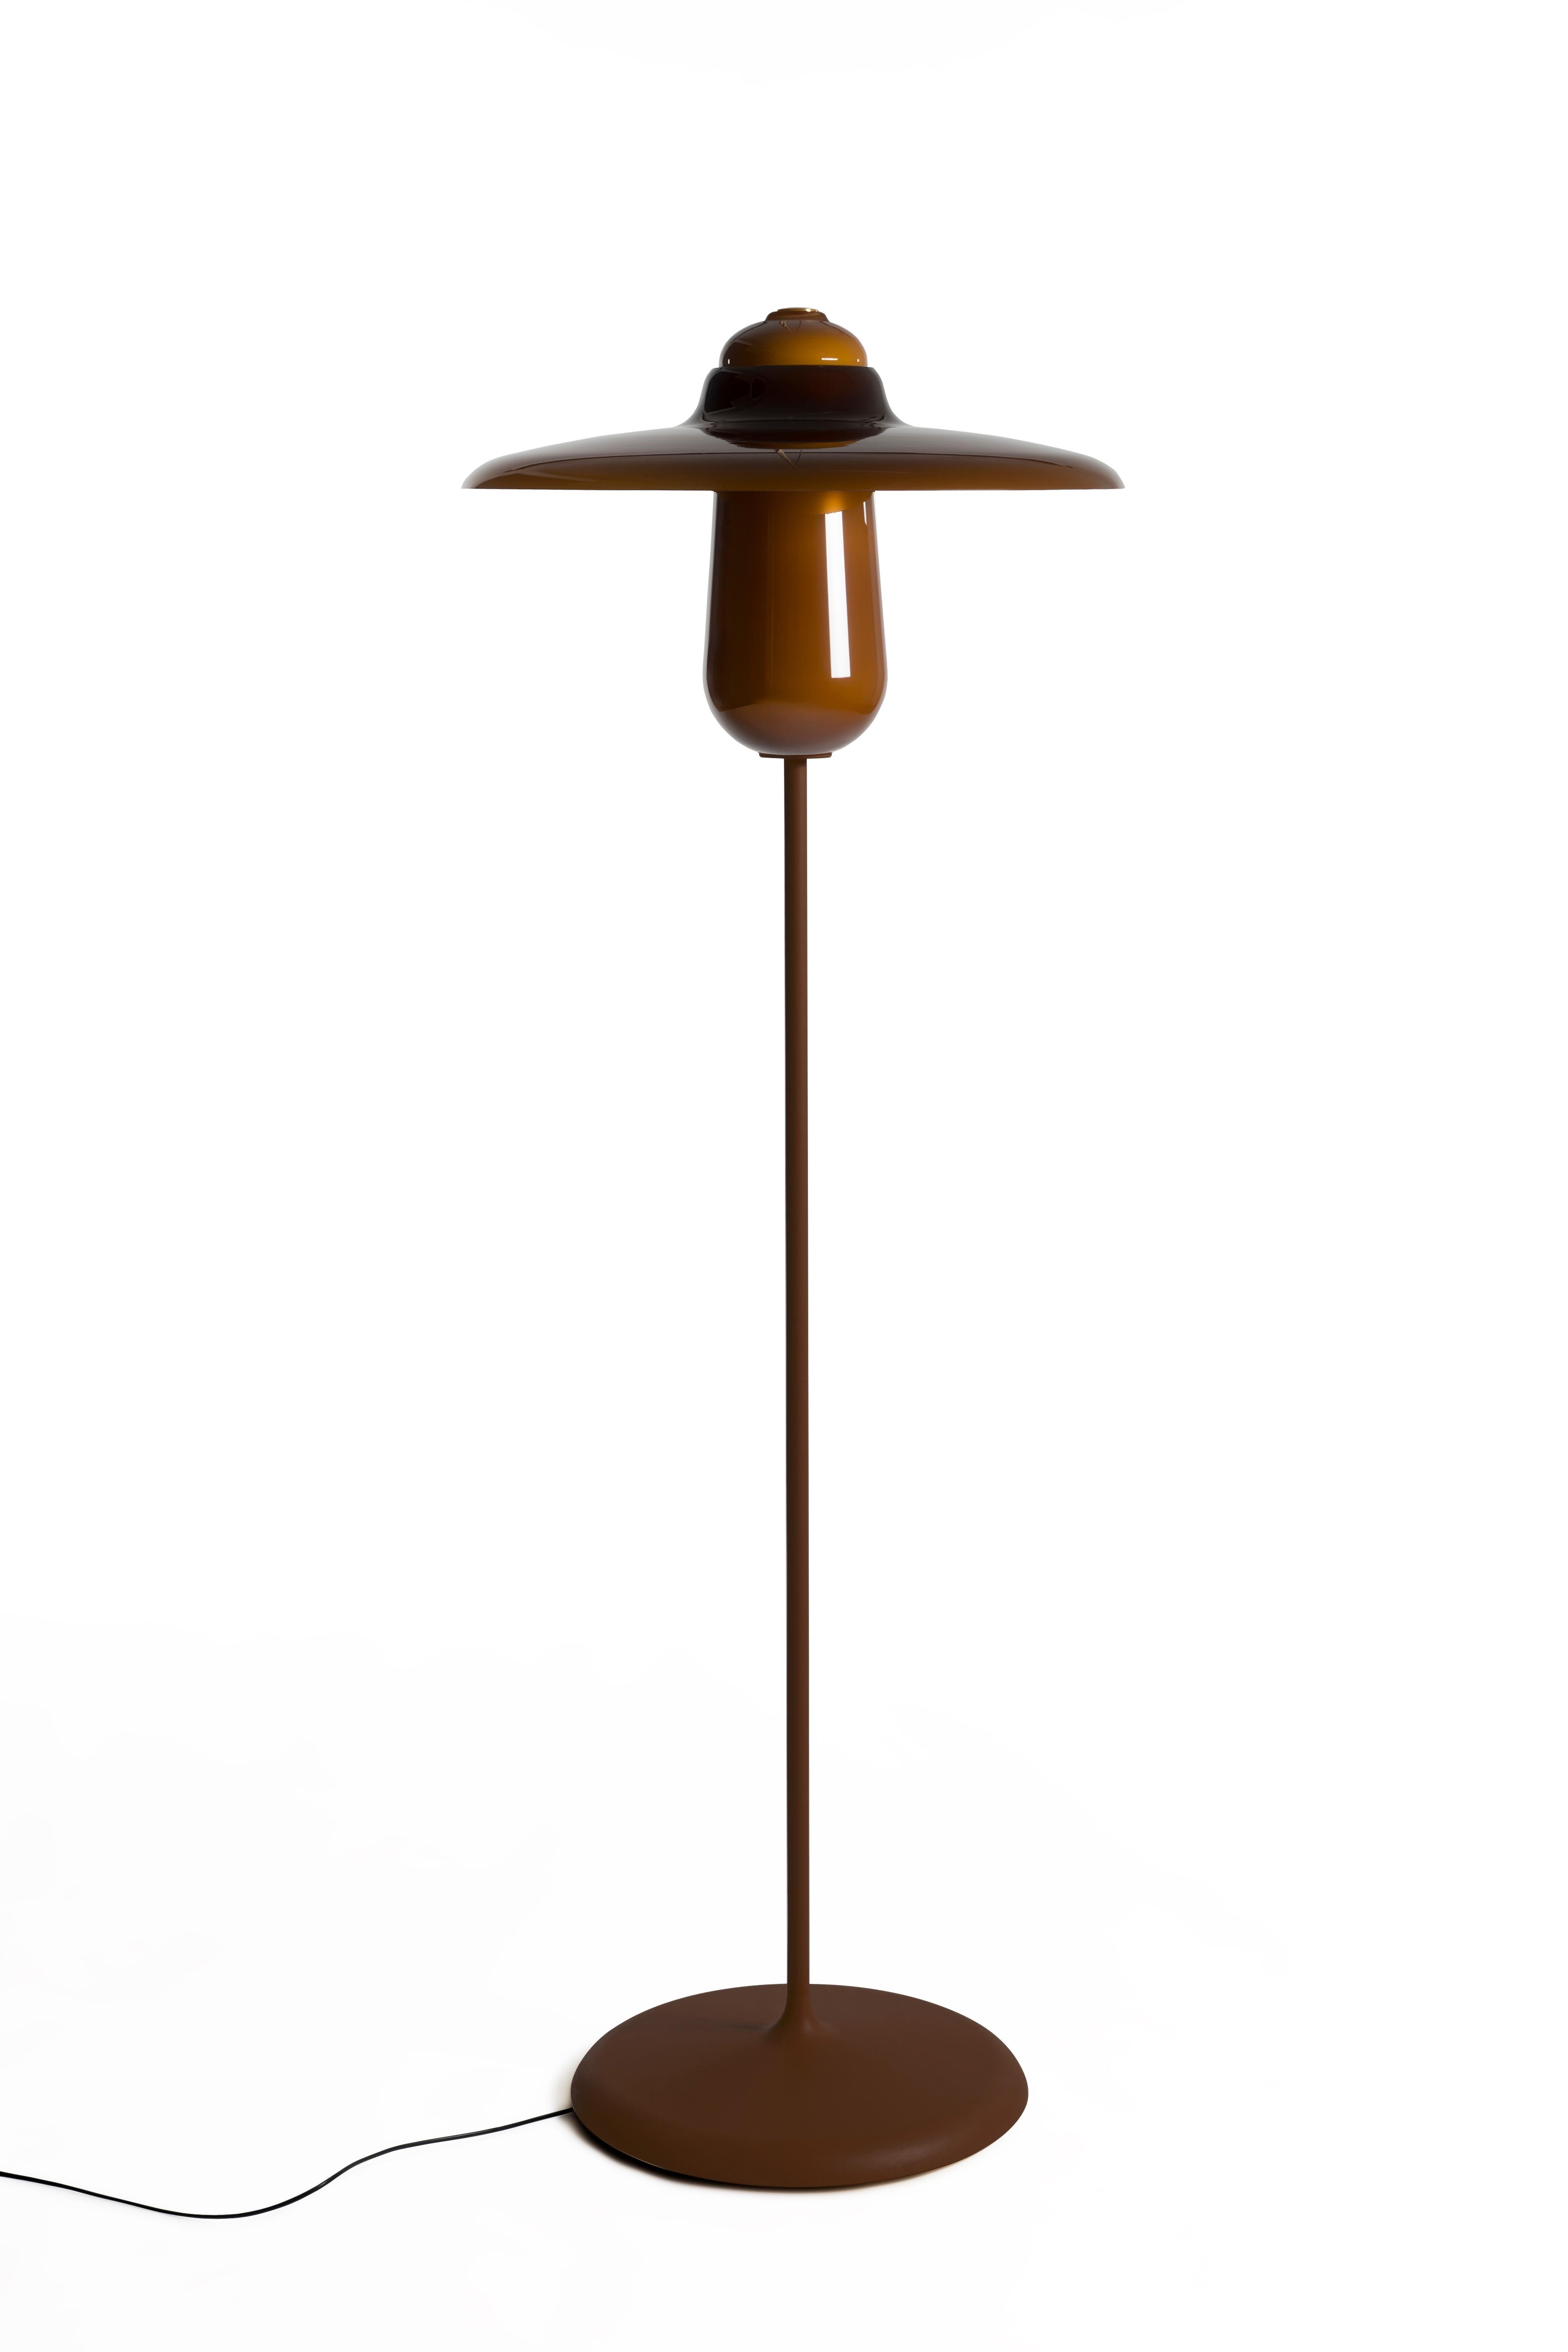 Revised Ovington Floor
The Ovington Floor Lamp is a stylish complement to any interior. Ovington Floor Lamp exudes an inviting radiance and warmth whether it`s illuminated or switched off. The Ovington Floor Lamp is crafted in Italian glass for the